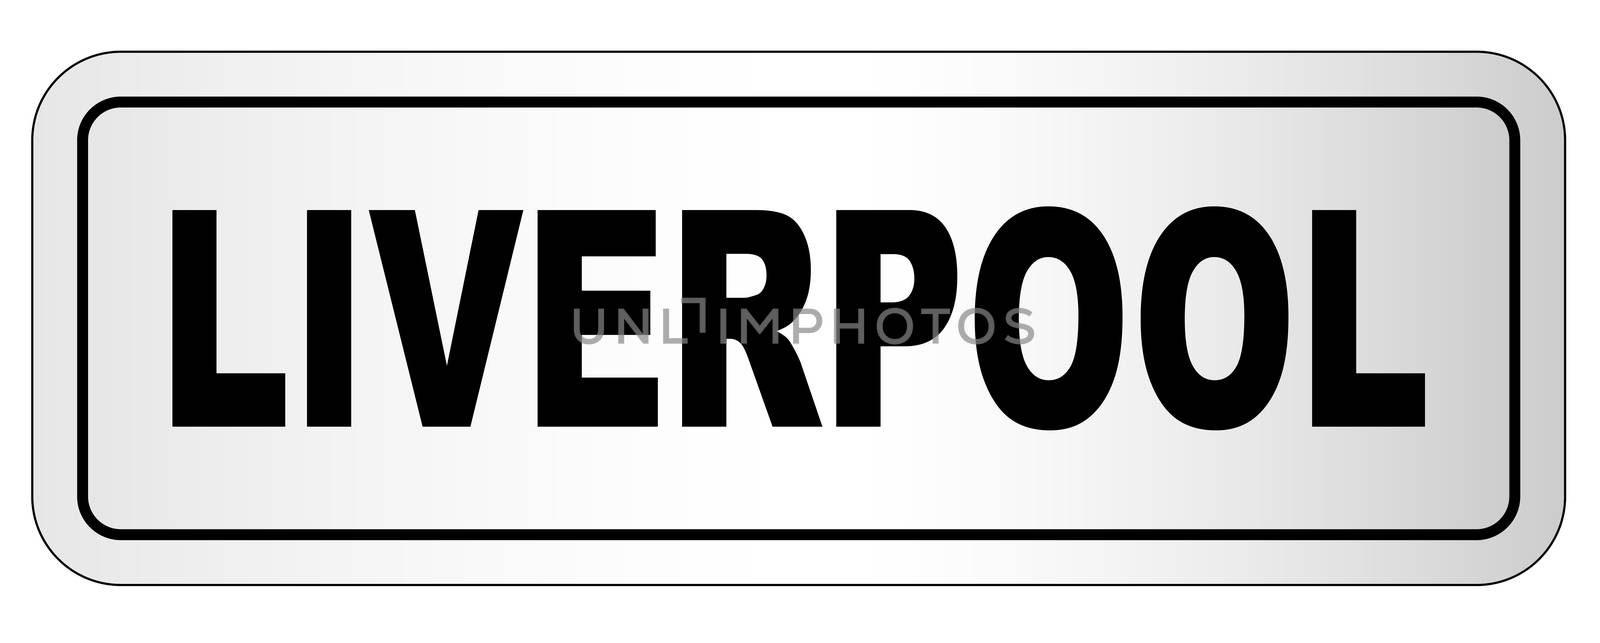 The city of Liverpool nameplate on a white background